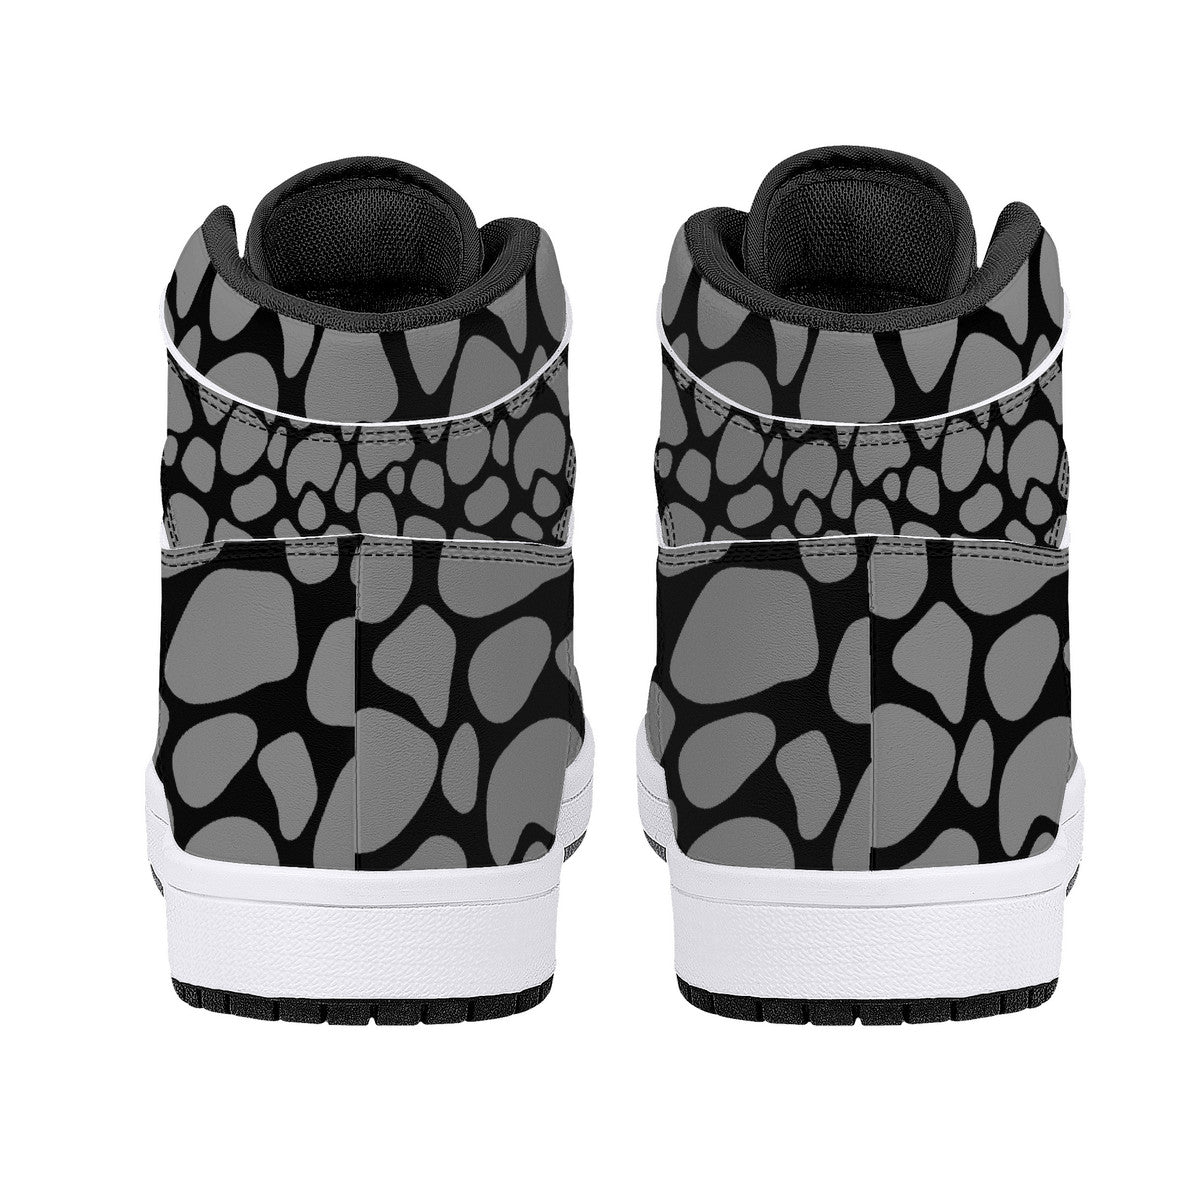 "Mono Giraffe" High-Top Synthetic Leather Sneakers